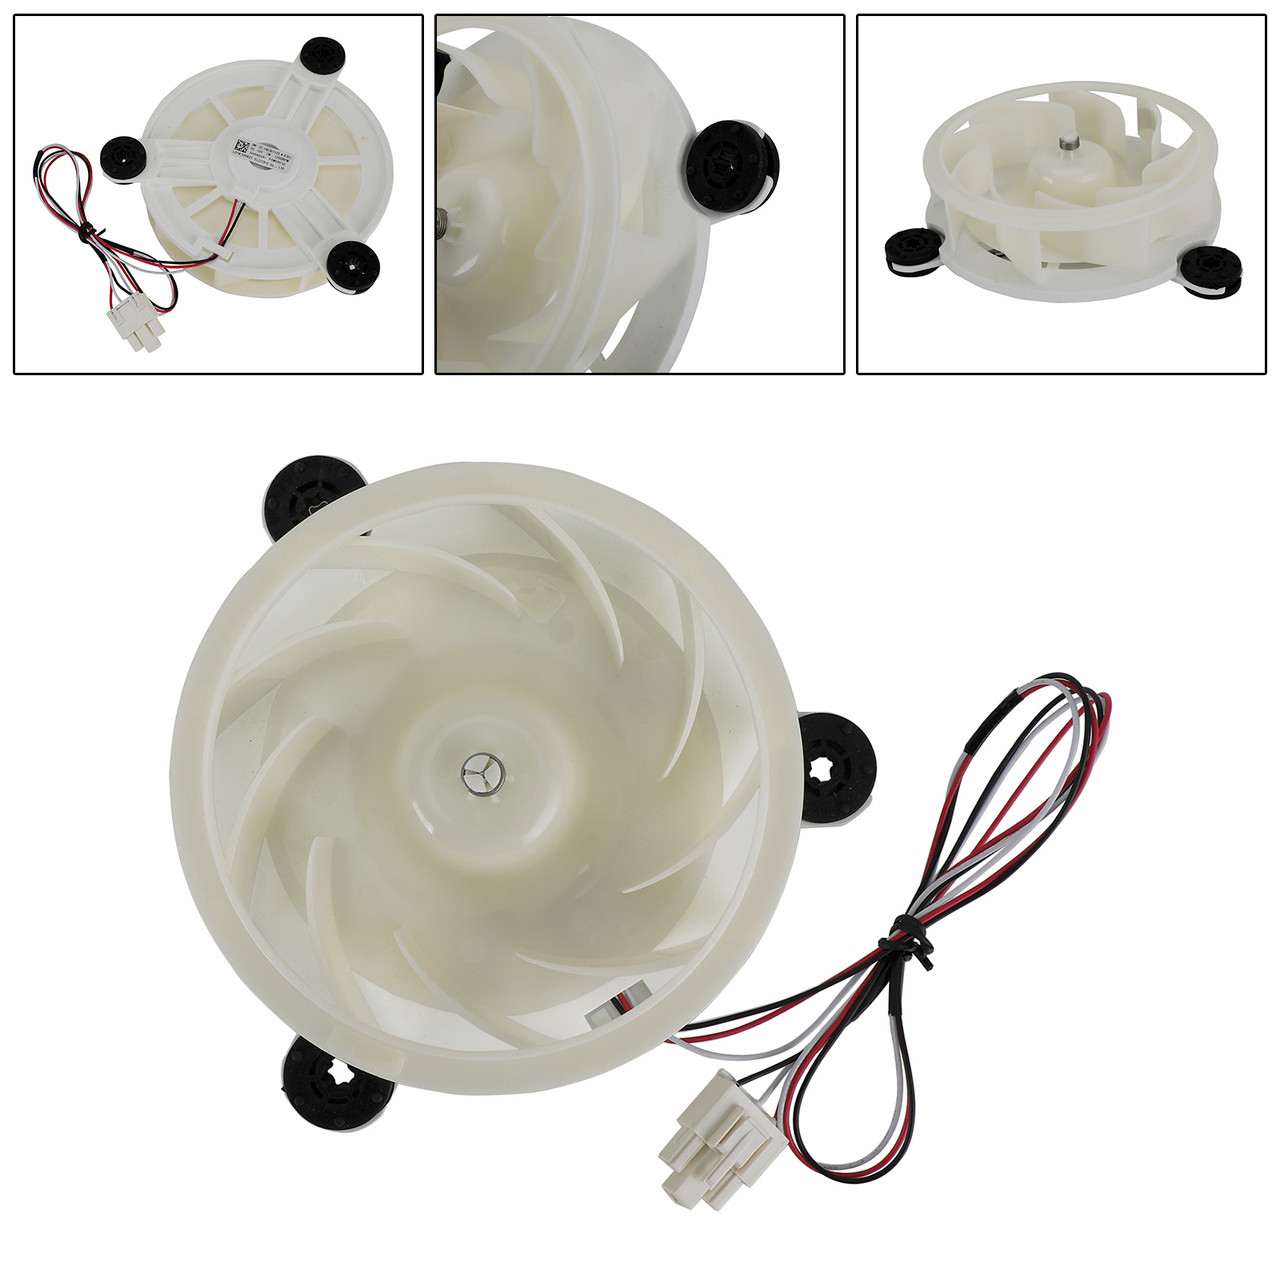 Refrigerator Cooling Fan Motor Accessories Samsung ZWF-32-140 B17123.4-5(A1)